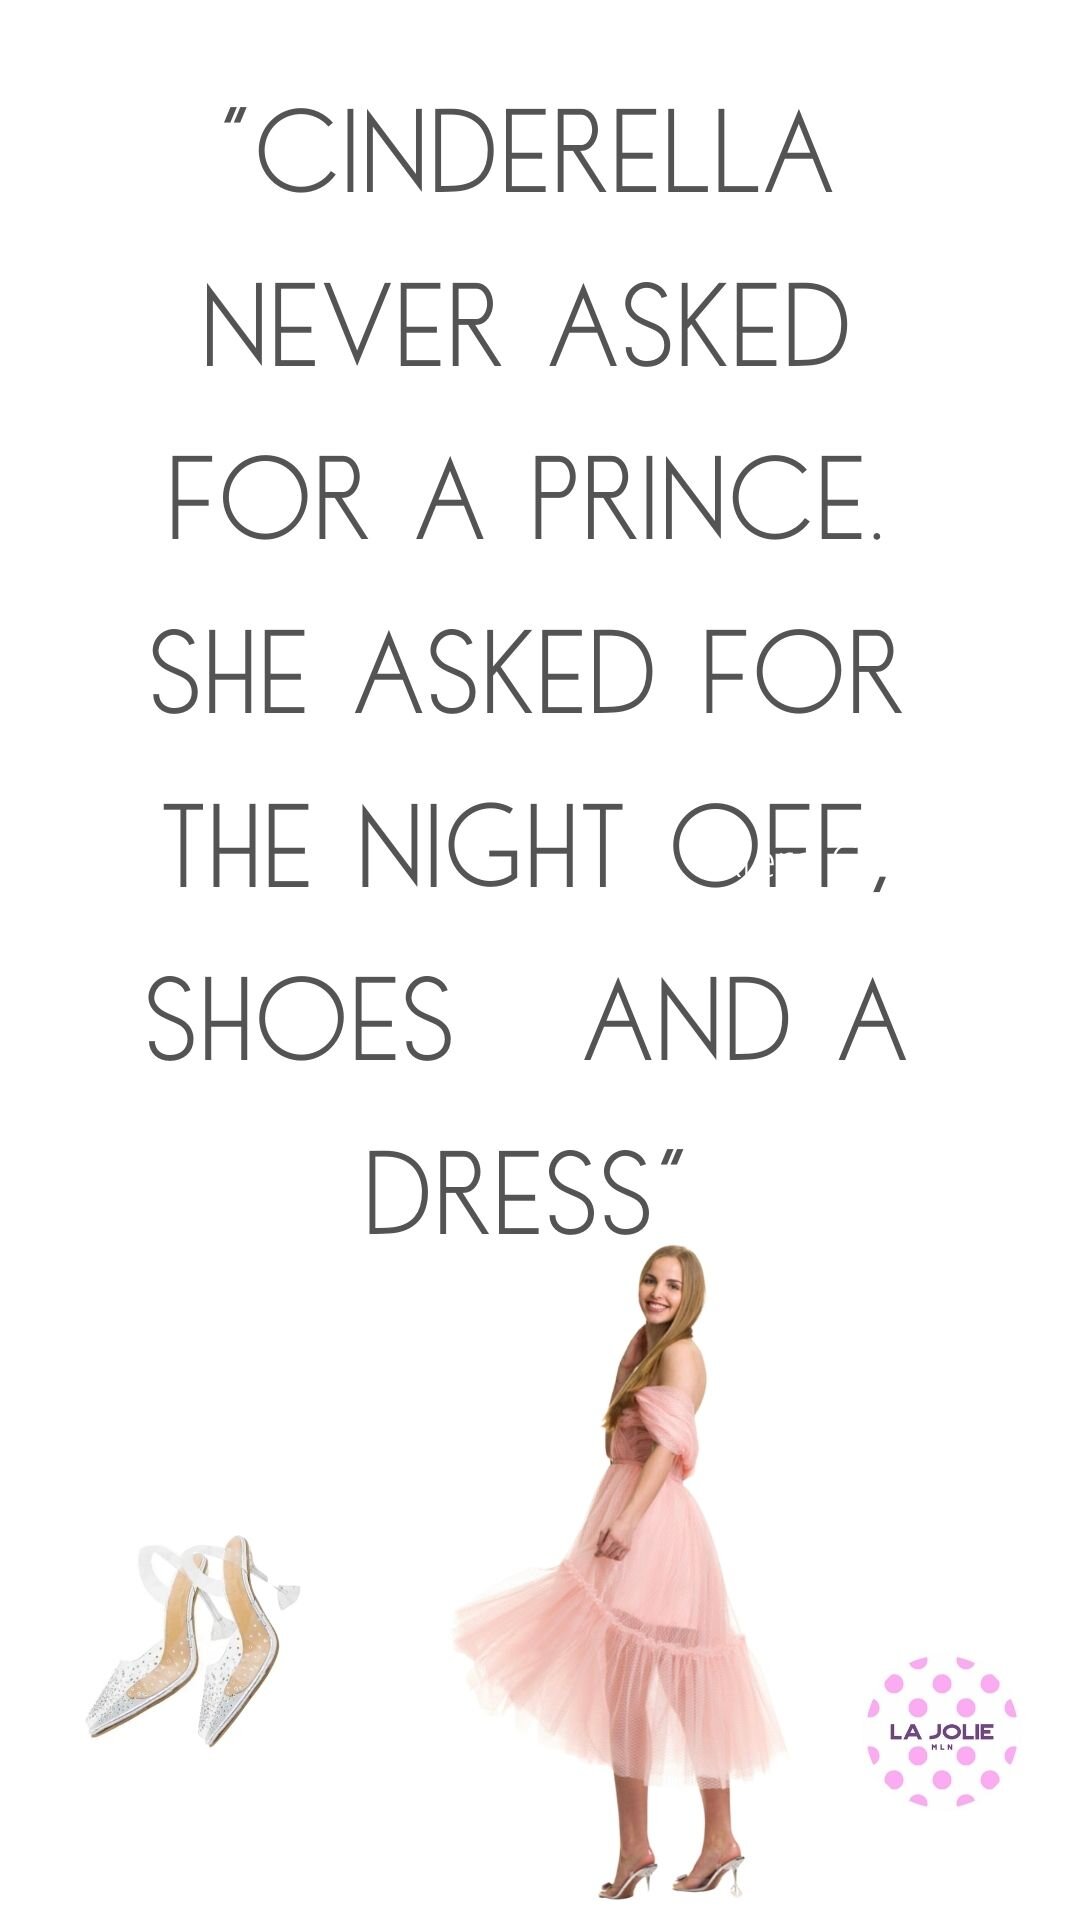 Cinderella never asked for a prince. She asked for the night off and a dress.jpg